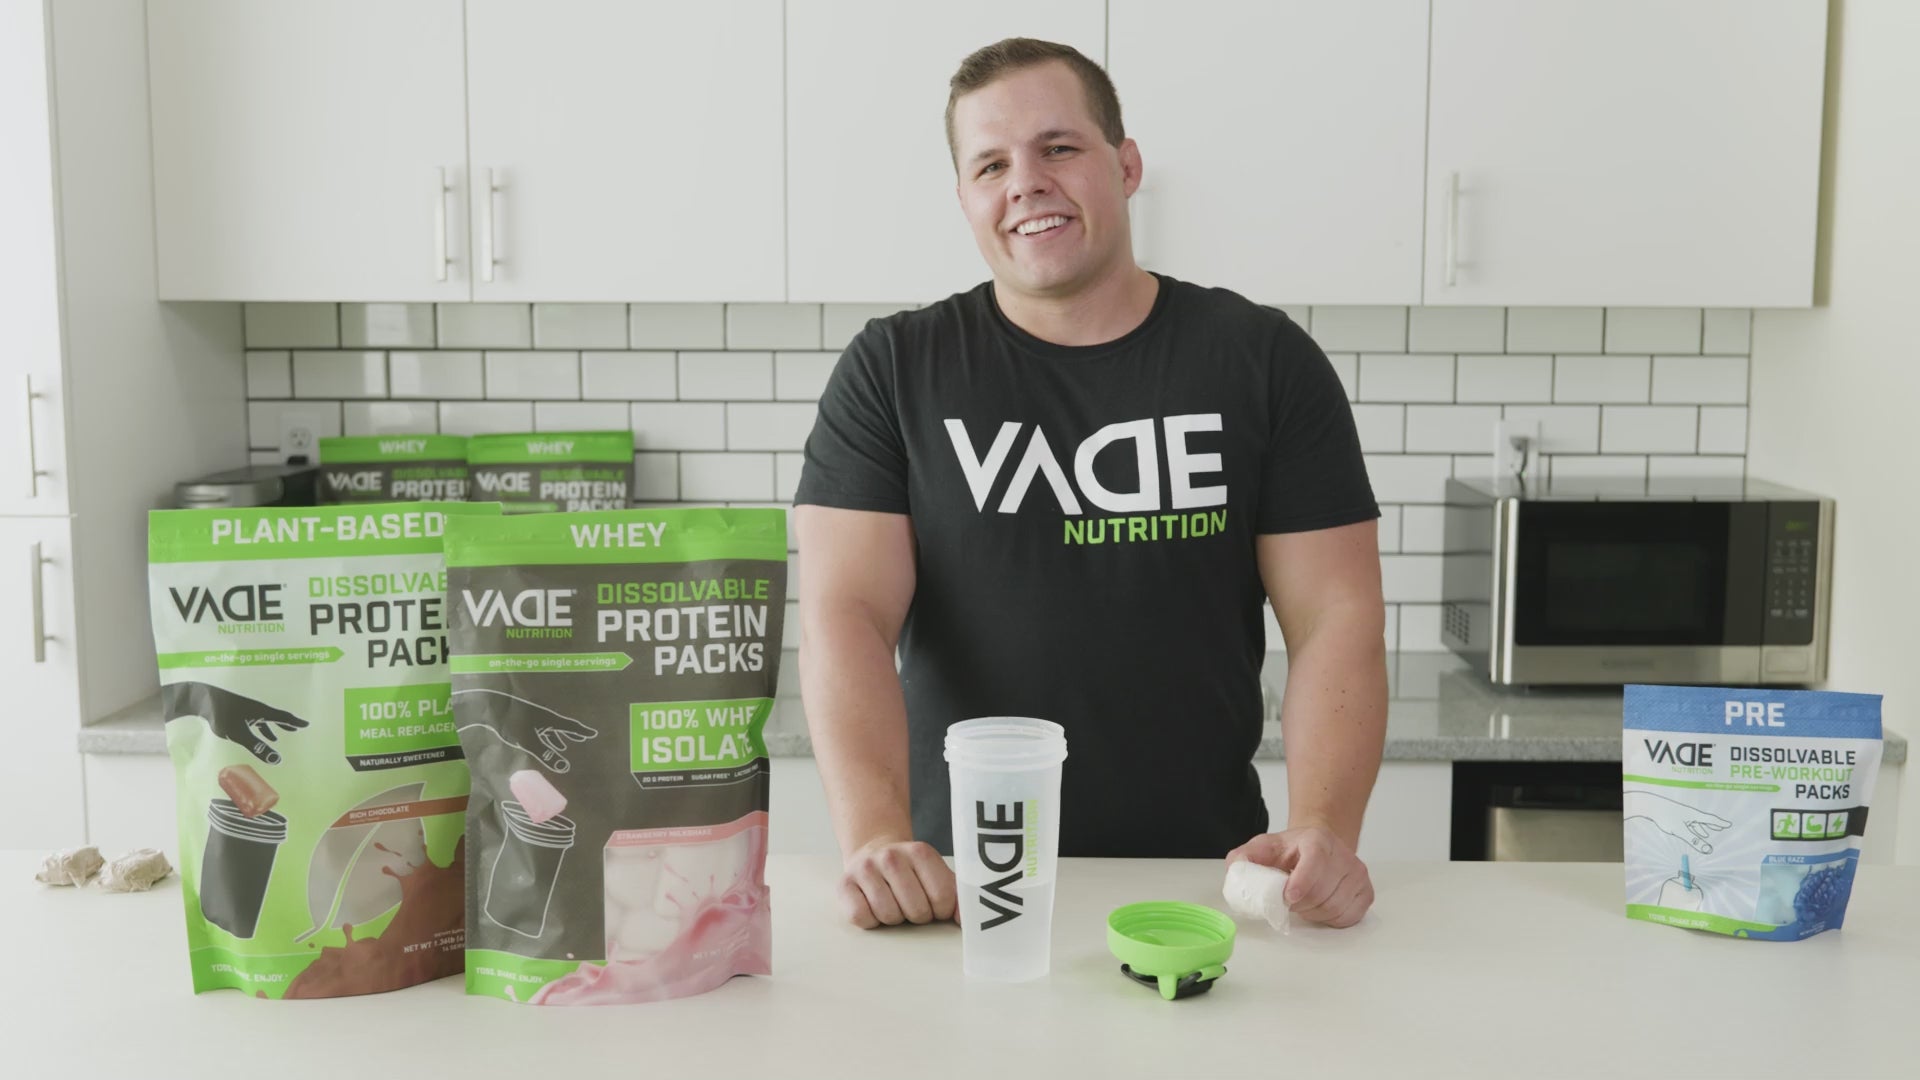 Vade Nutrition Dissolvable Protein Pack Review